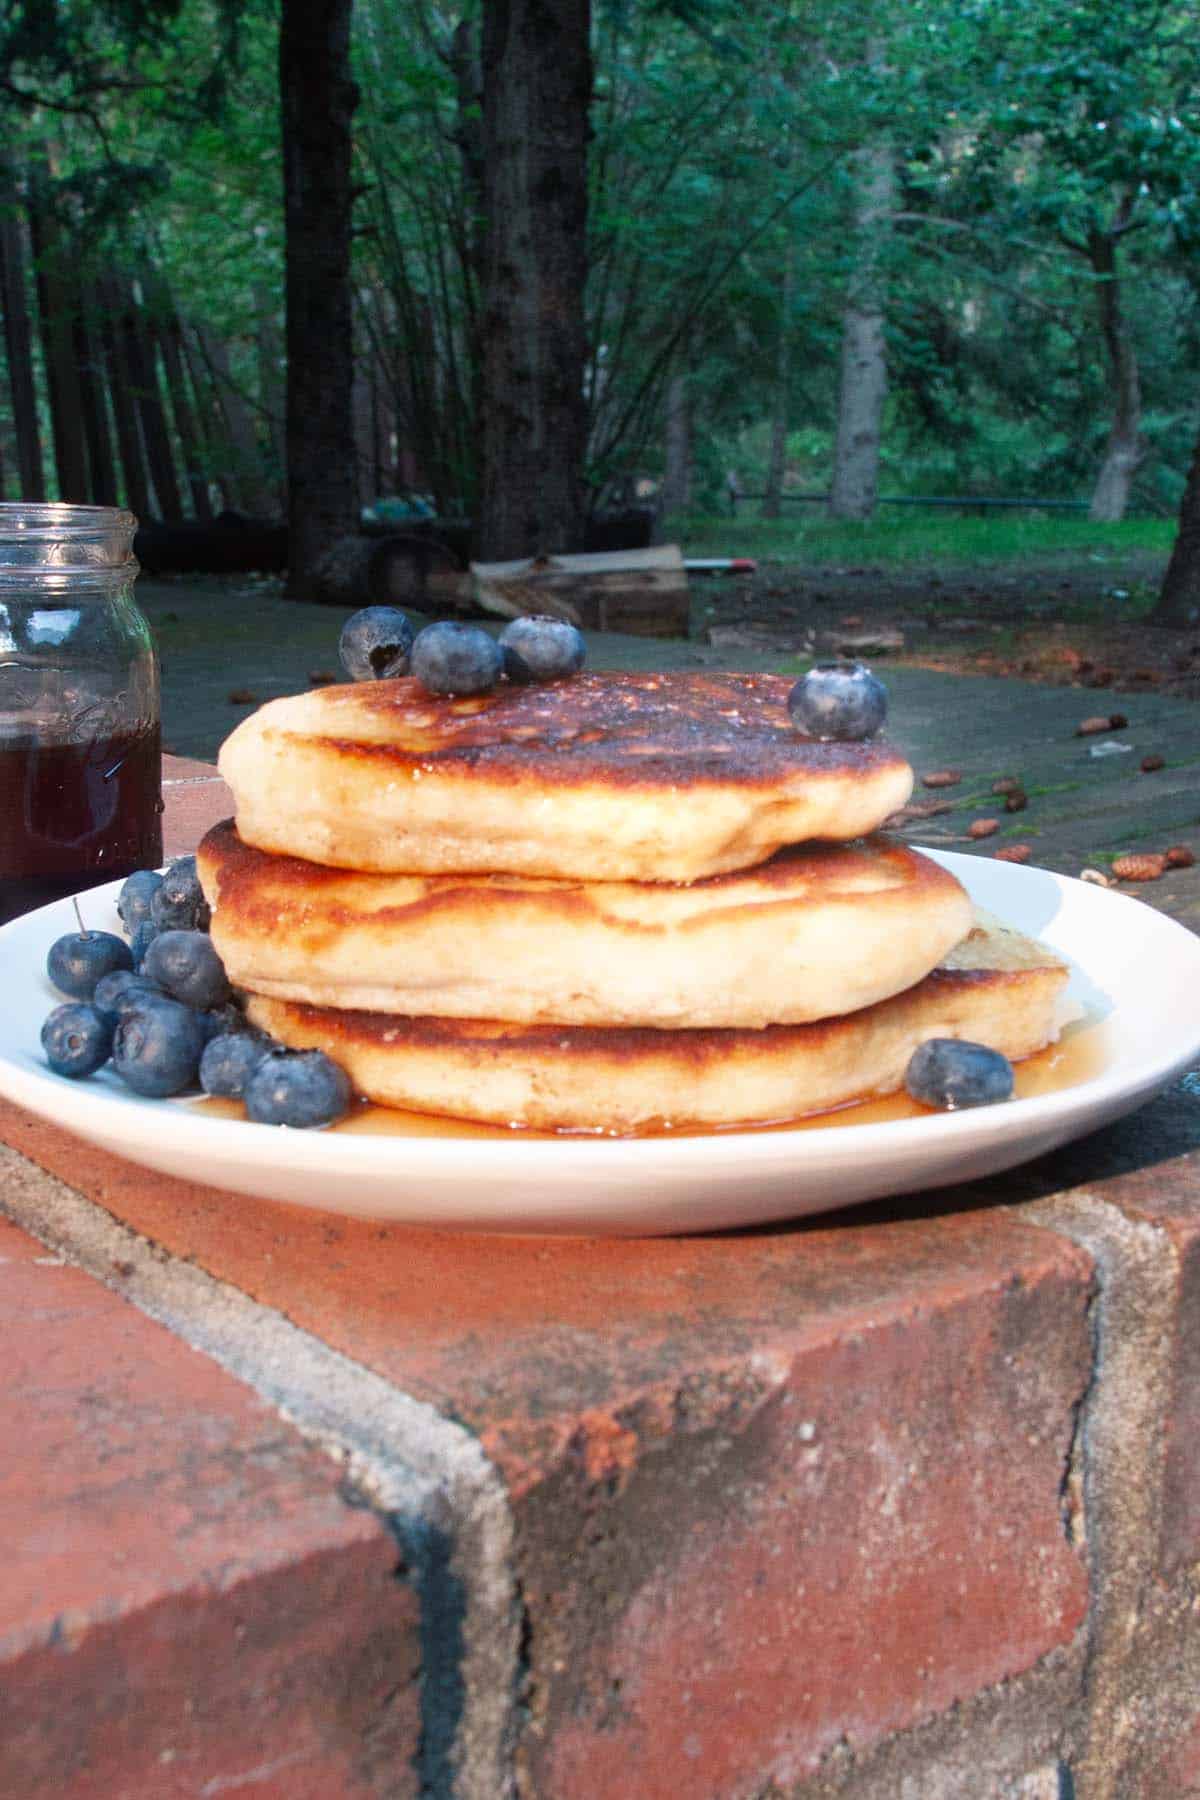 A stack of pancakes, maple syrup, and blueberries on a plate outside.